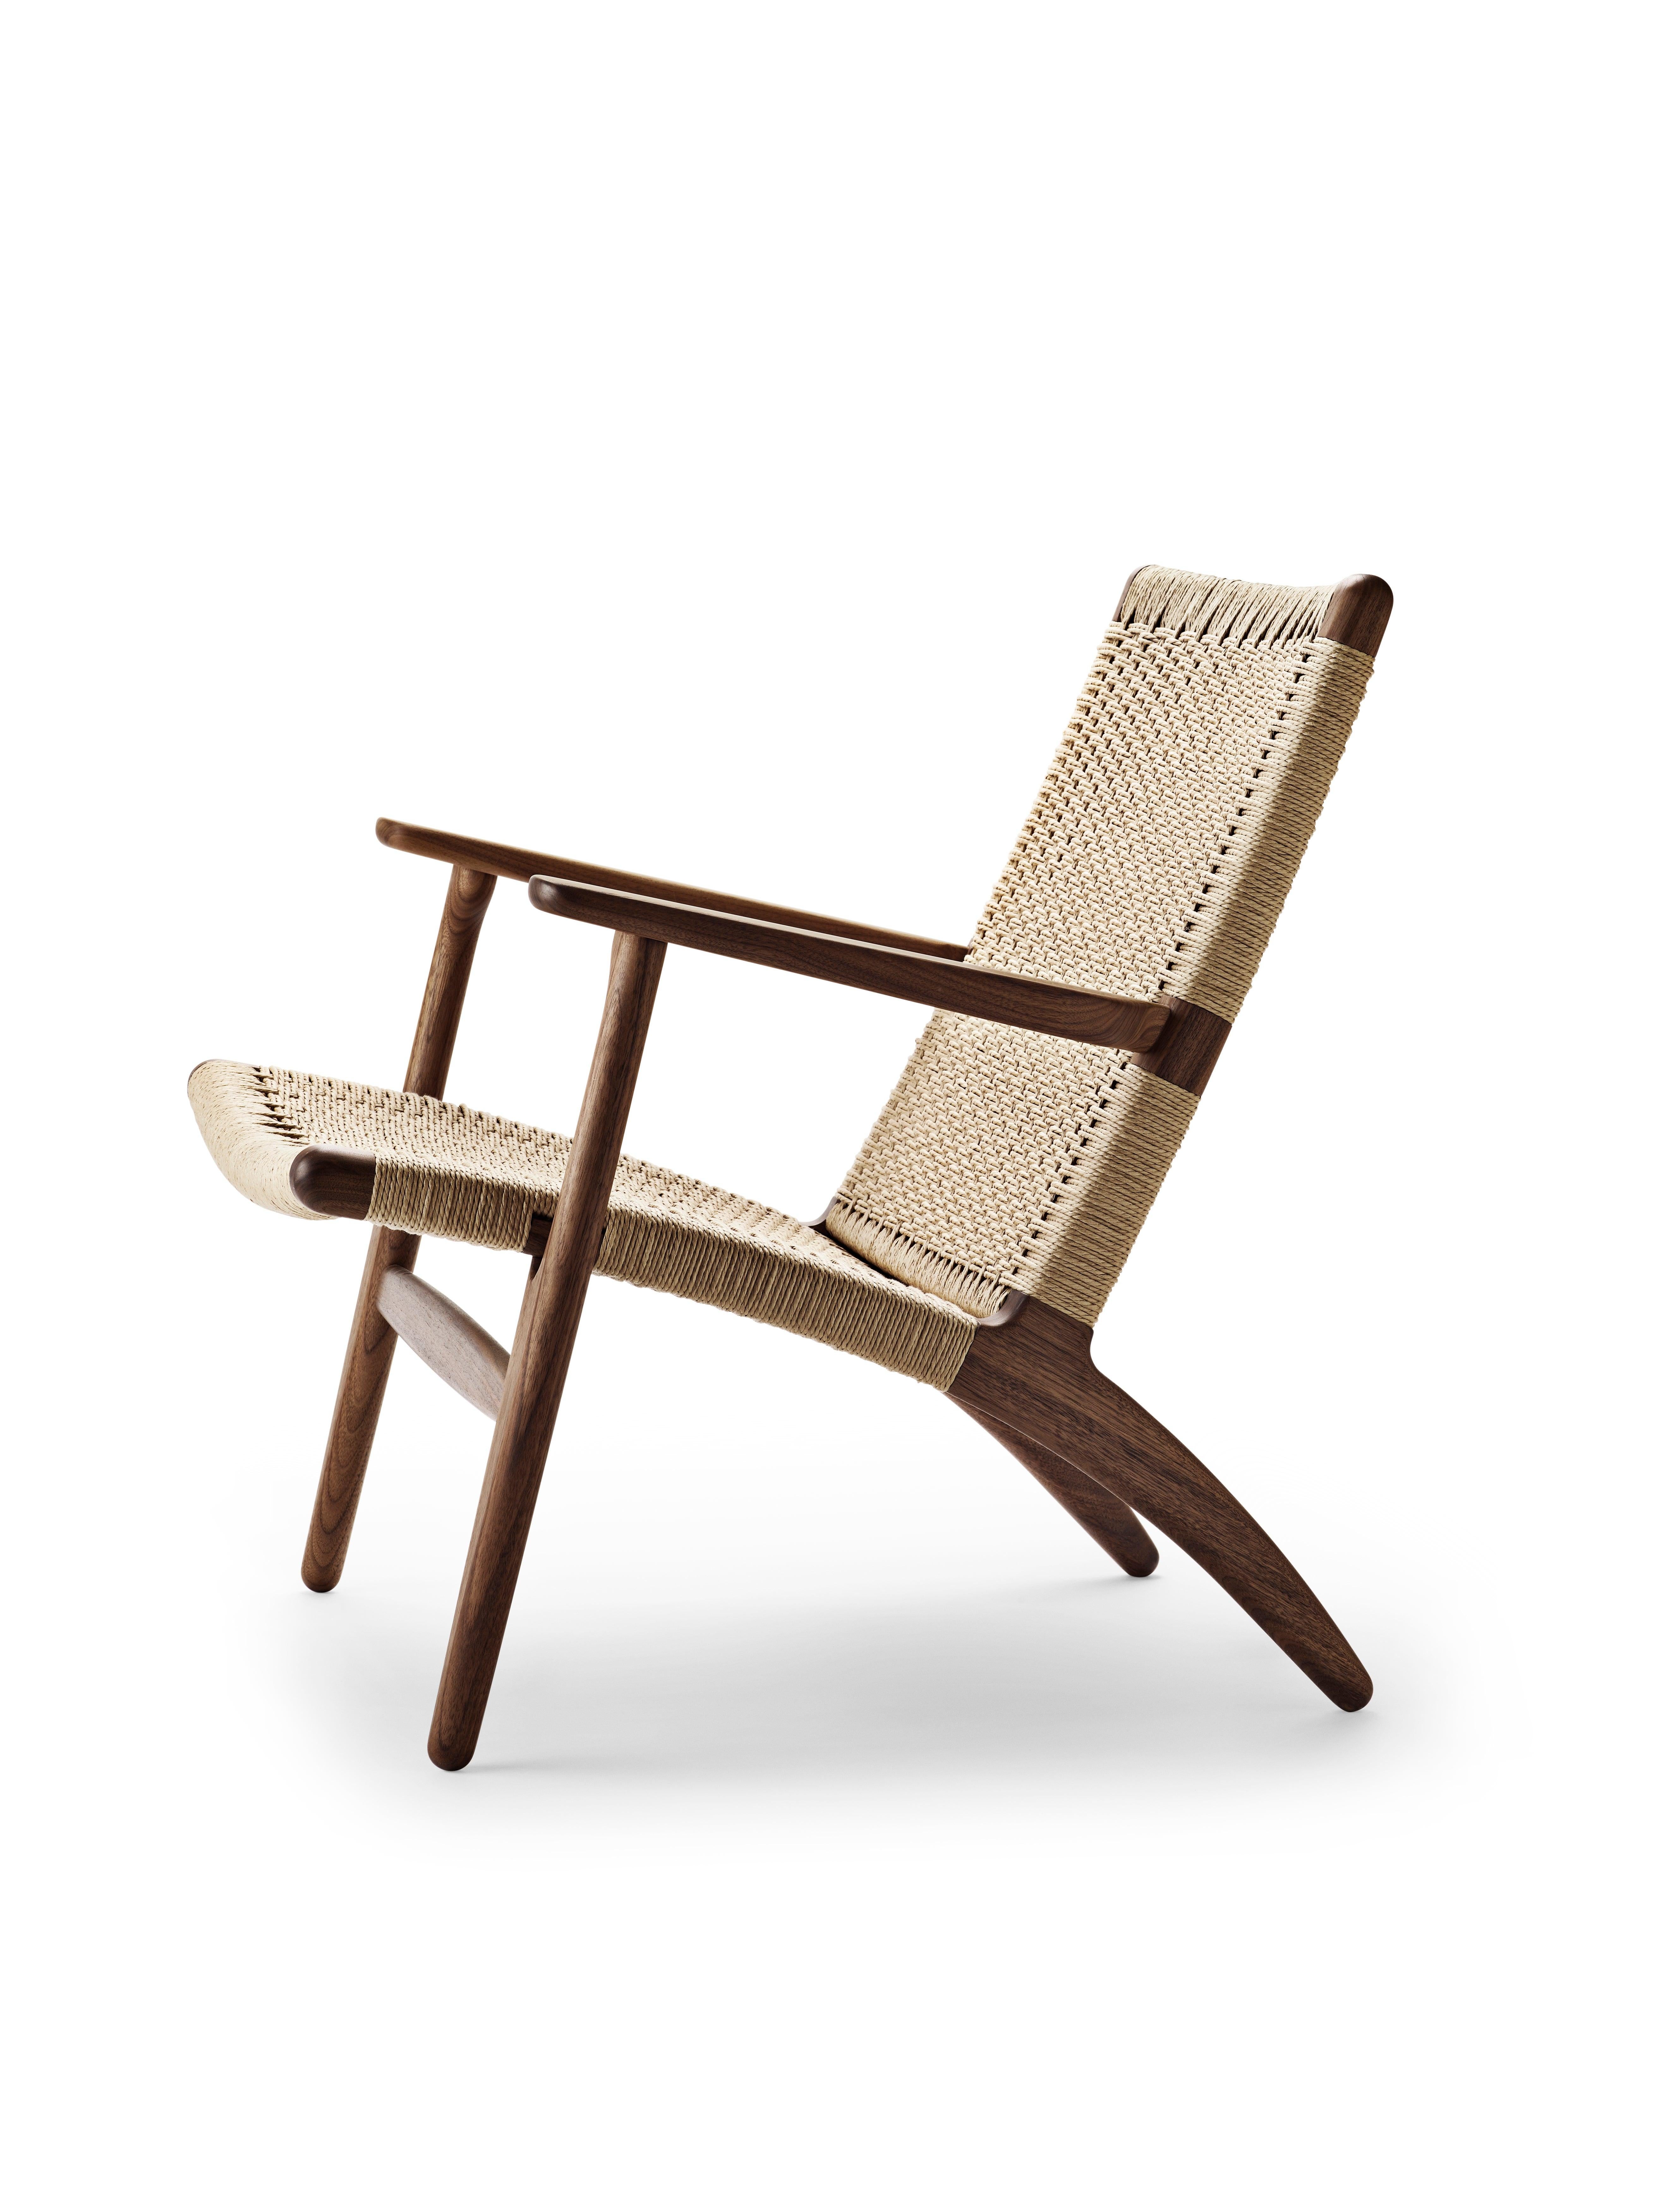 The CH25 lounge chair, like many of Hans J. Wegnerâ€™s other iconic designs, is clean and simple in its distinctive shape. But its introduction caused a stir due to Wegnerâ€™s choice of materials on the backrest and seat. The woven paper cord, a